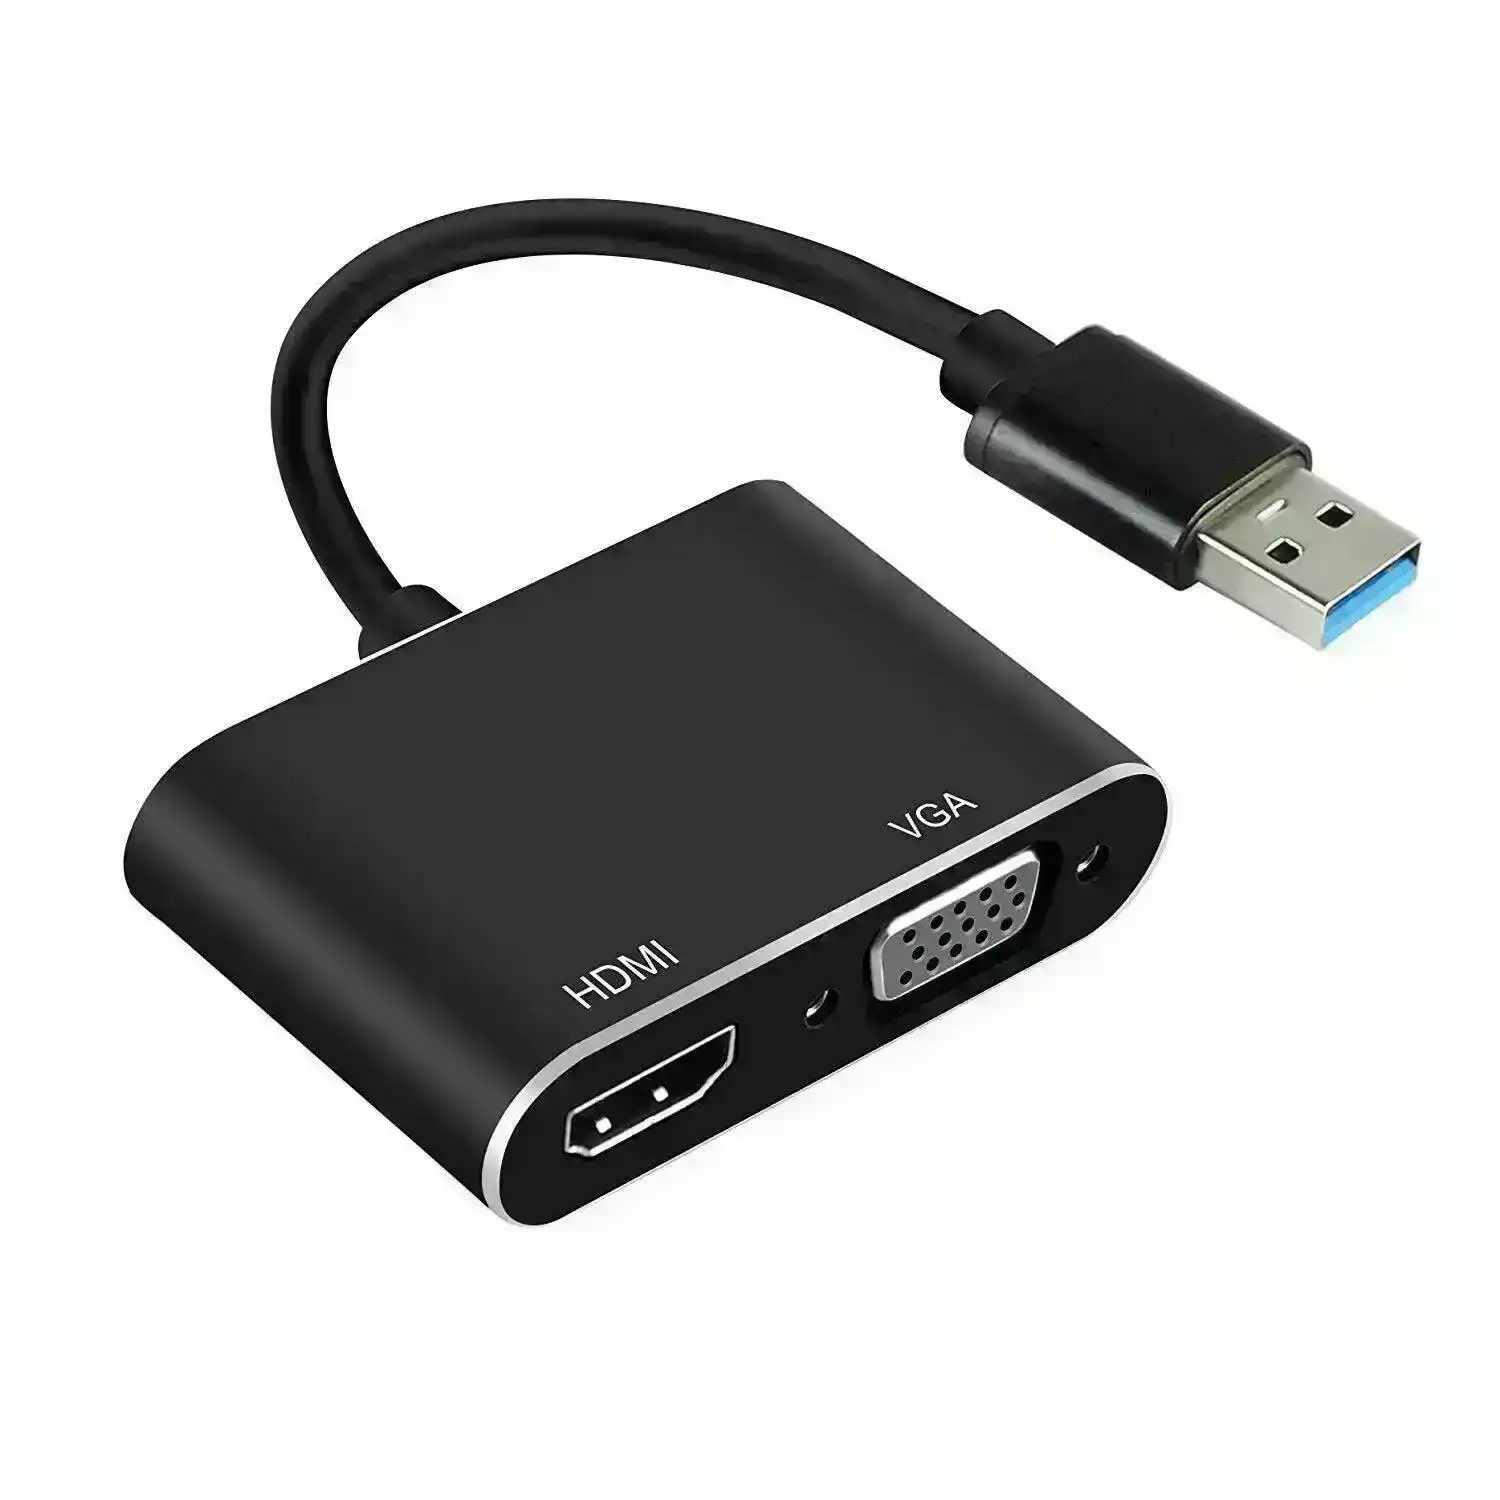 USB 3.0 to HDMI + VGA Full HD & 4K Video Adapter Cable Converter for PC Laptop